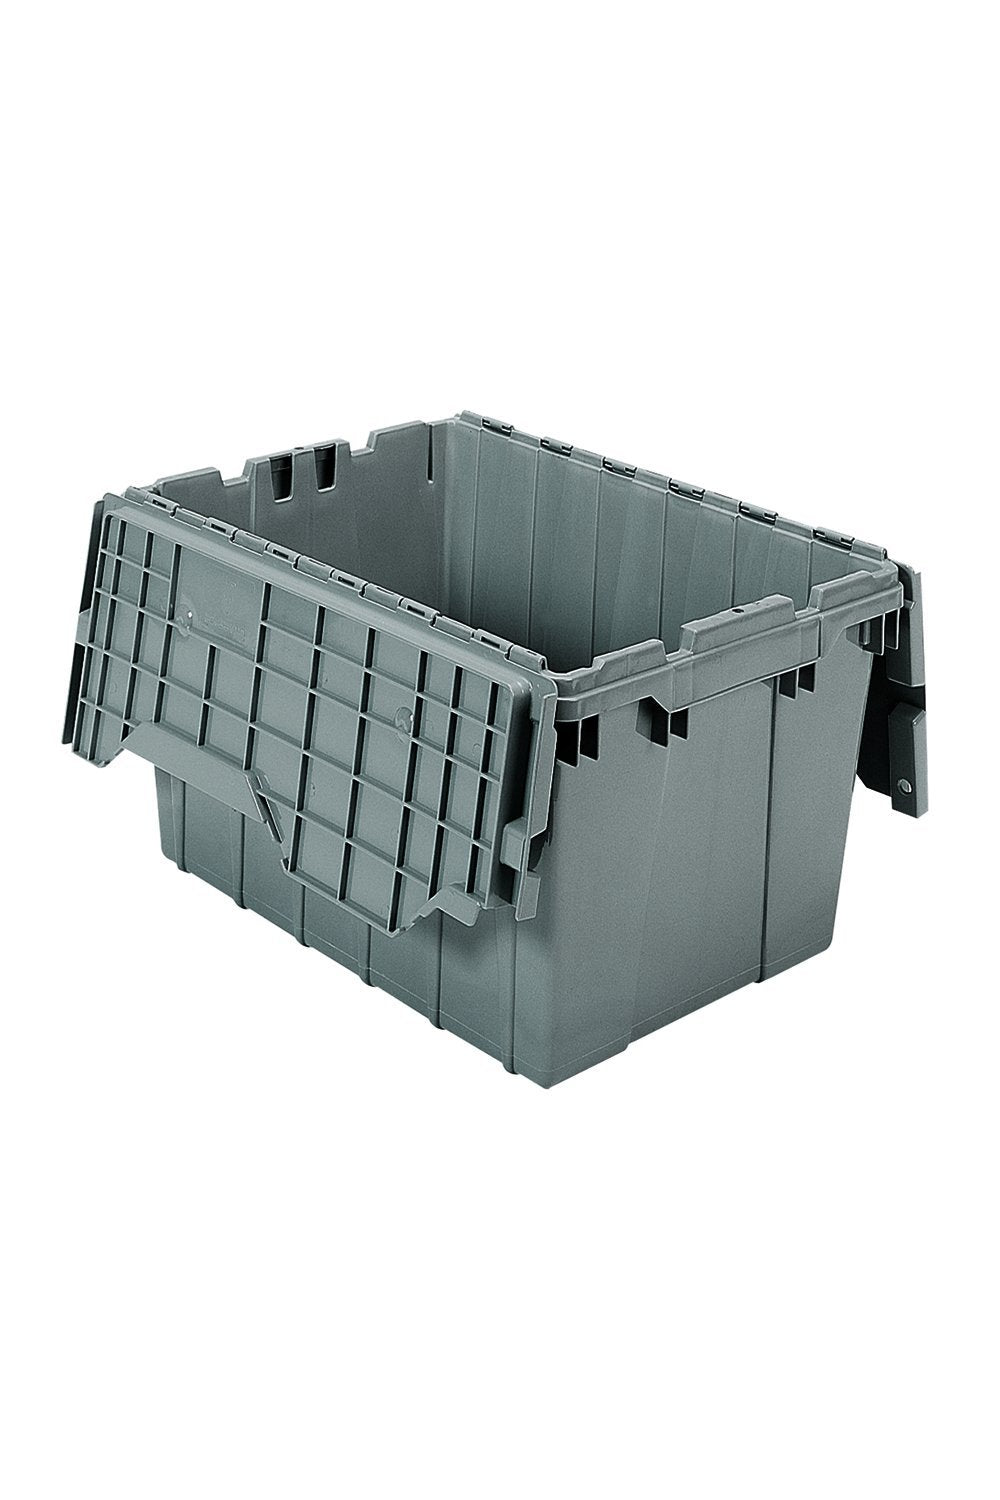 Attached Top Container Bins & Containers Acart 21-1/2"L x 15-1/4"W x 12-3/4"H Grey 